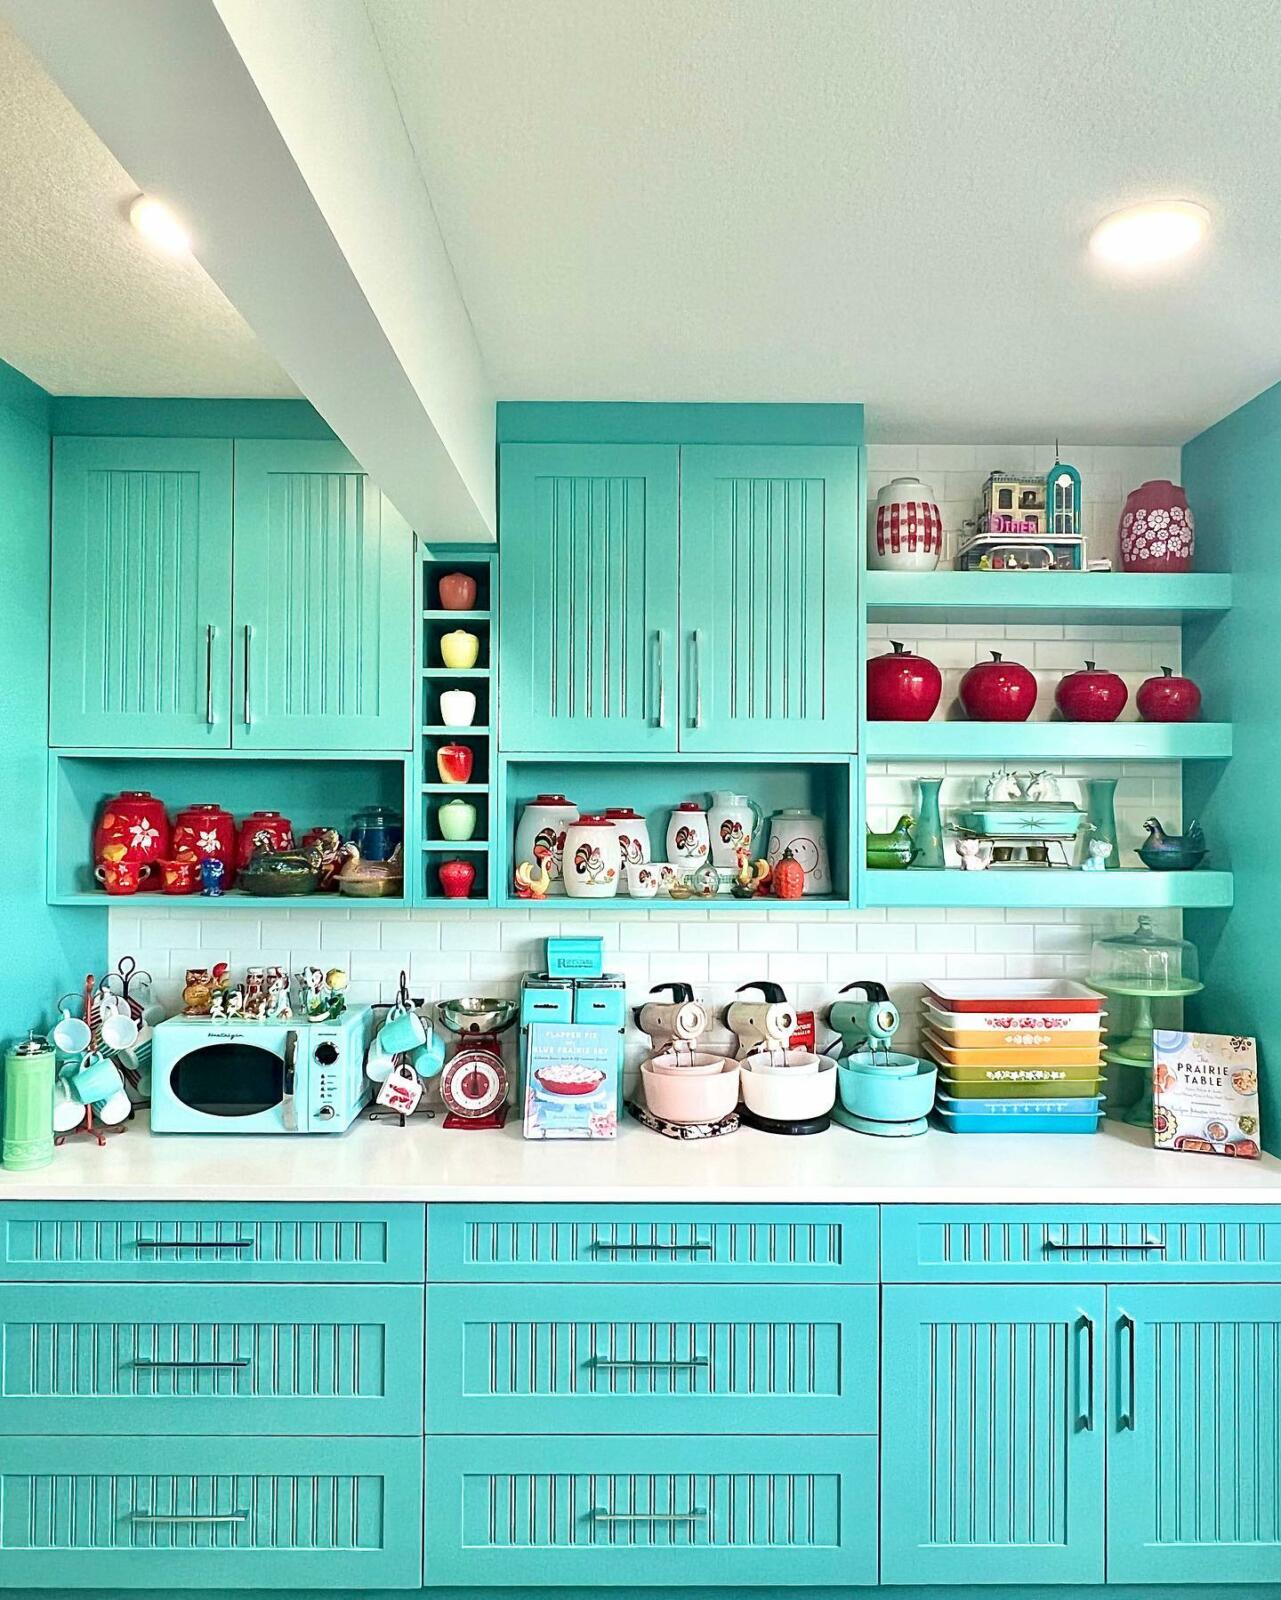 A kitchen with vibrant turquoise cabinets.